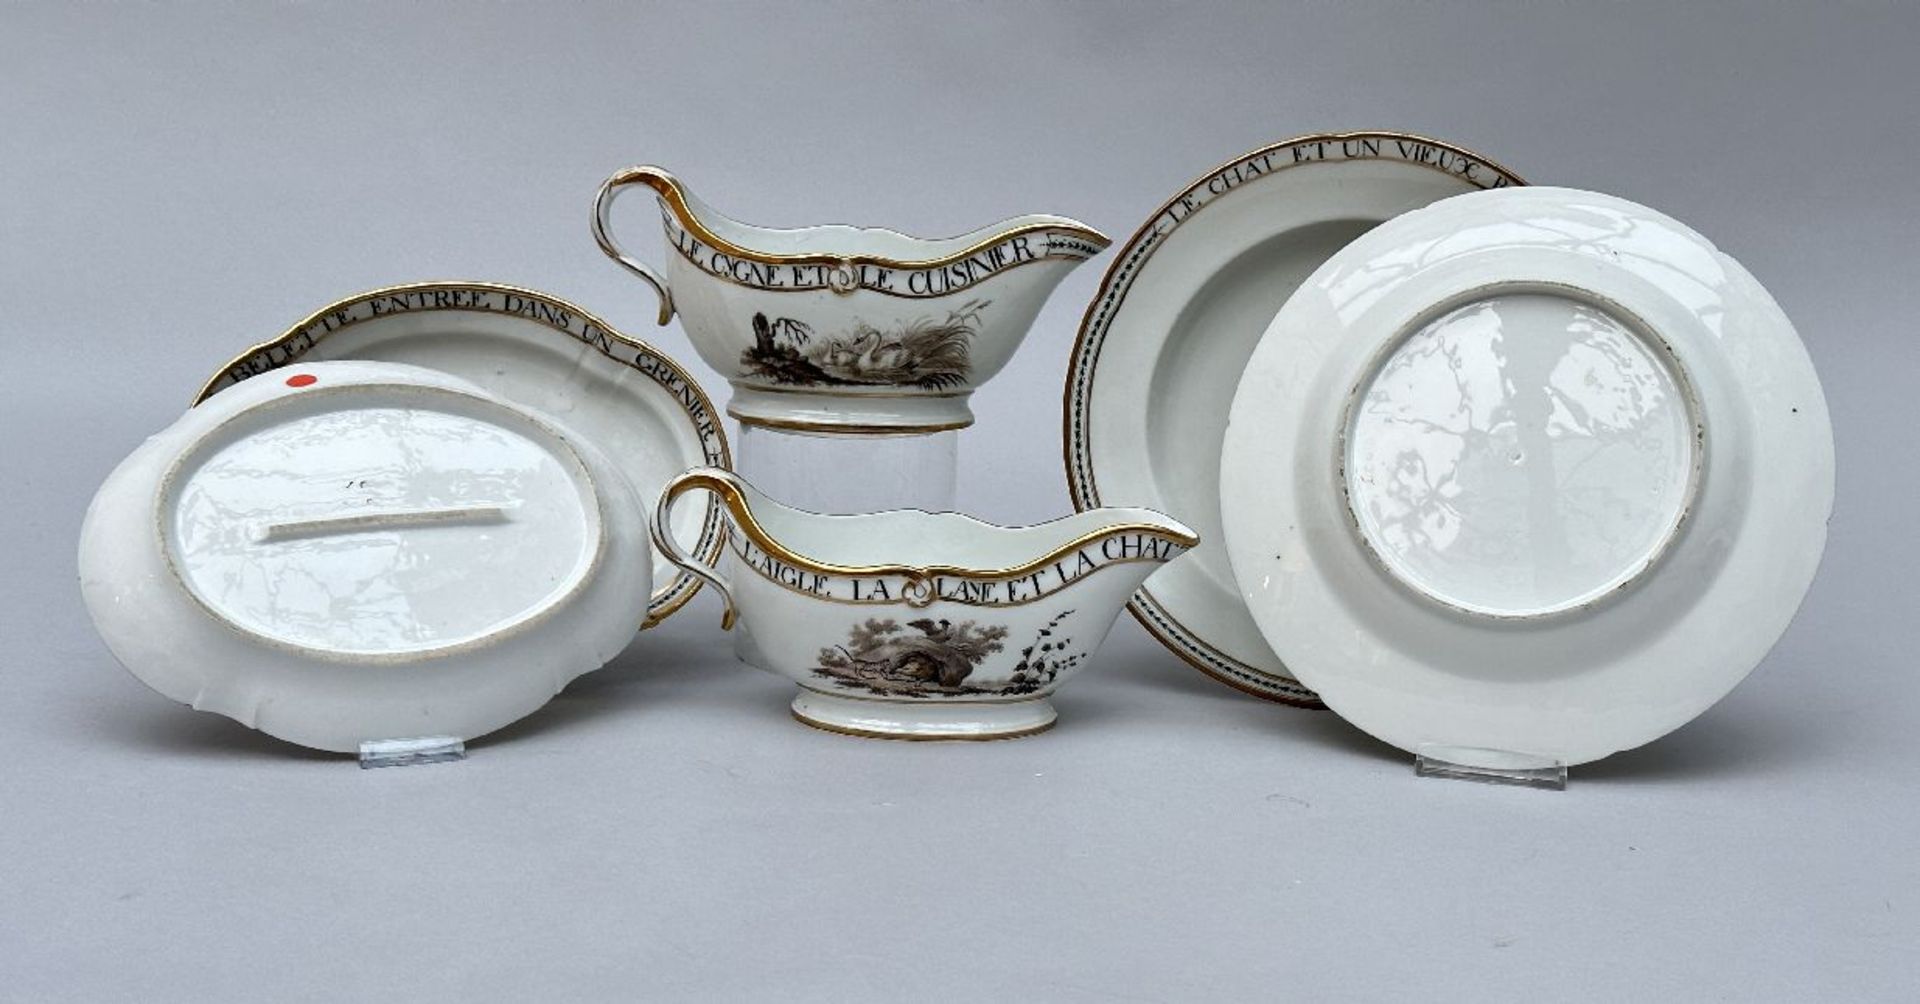 Two plates and two sauce boats in porcelain by Louis Cretté in Brussels 'fables de La Fontaine' - Image 2 of 4